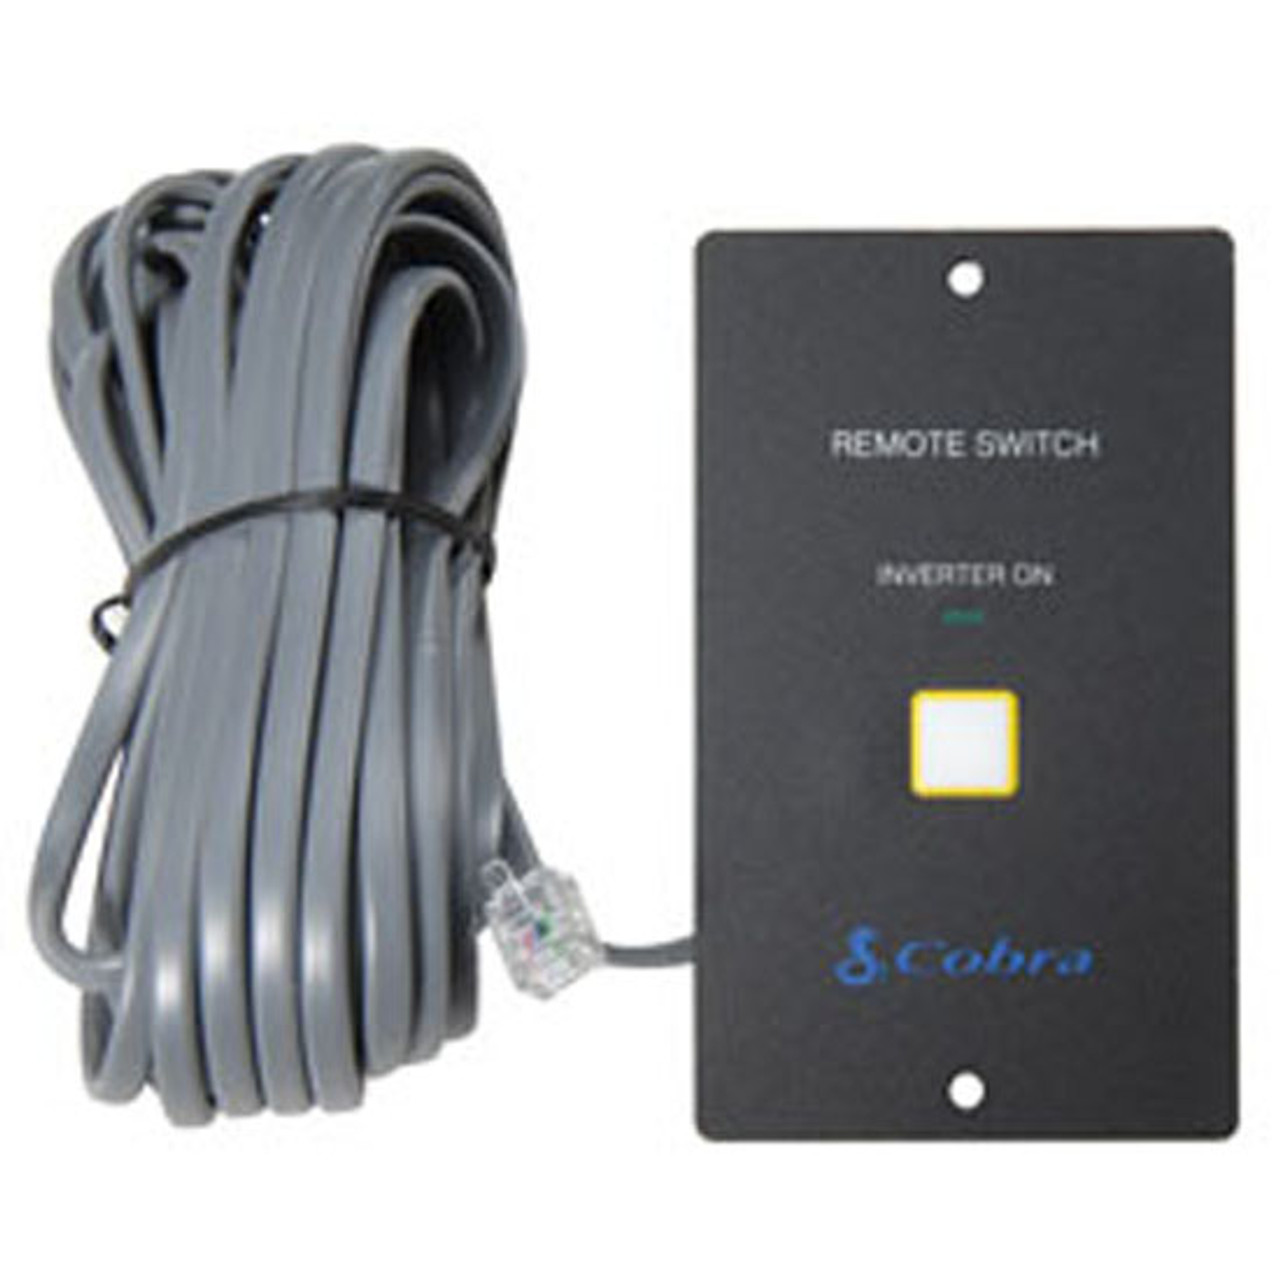 Remote On/Off Switch For CPI-1575 Or CPI-2575 Power Inverters - 4